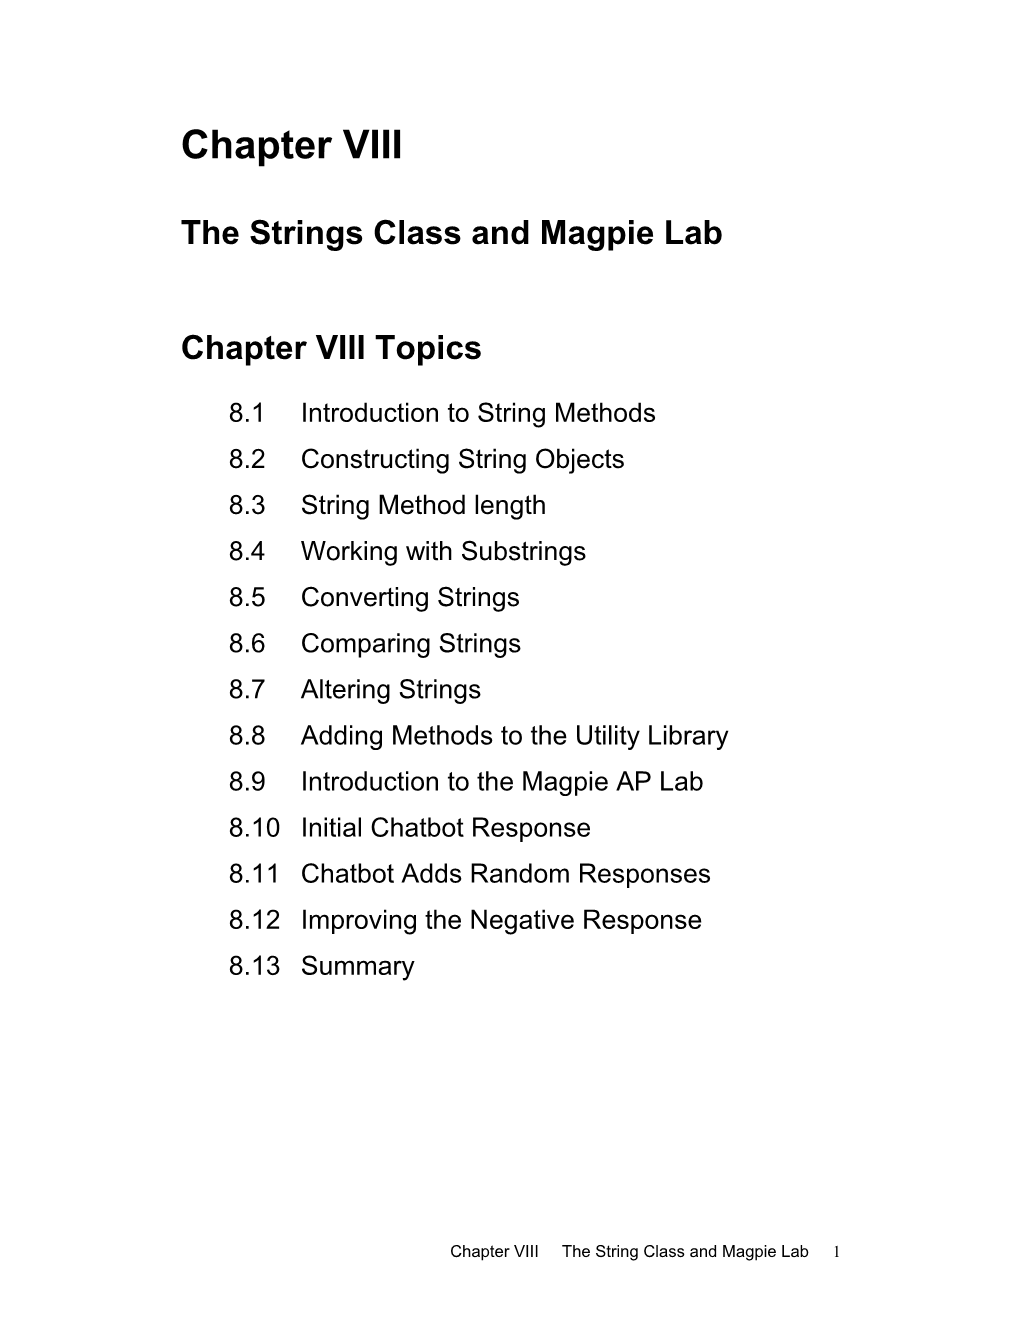 The Strings Class and Magpie Lab